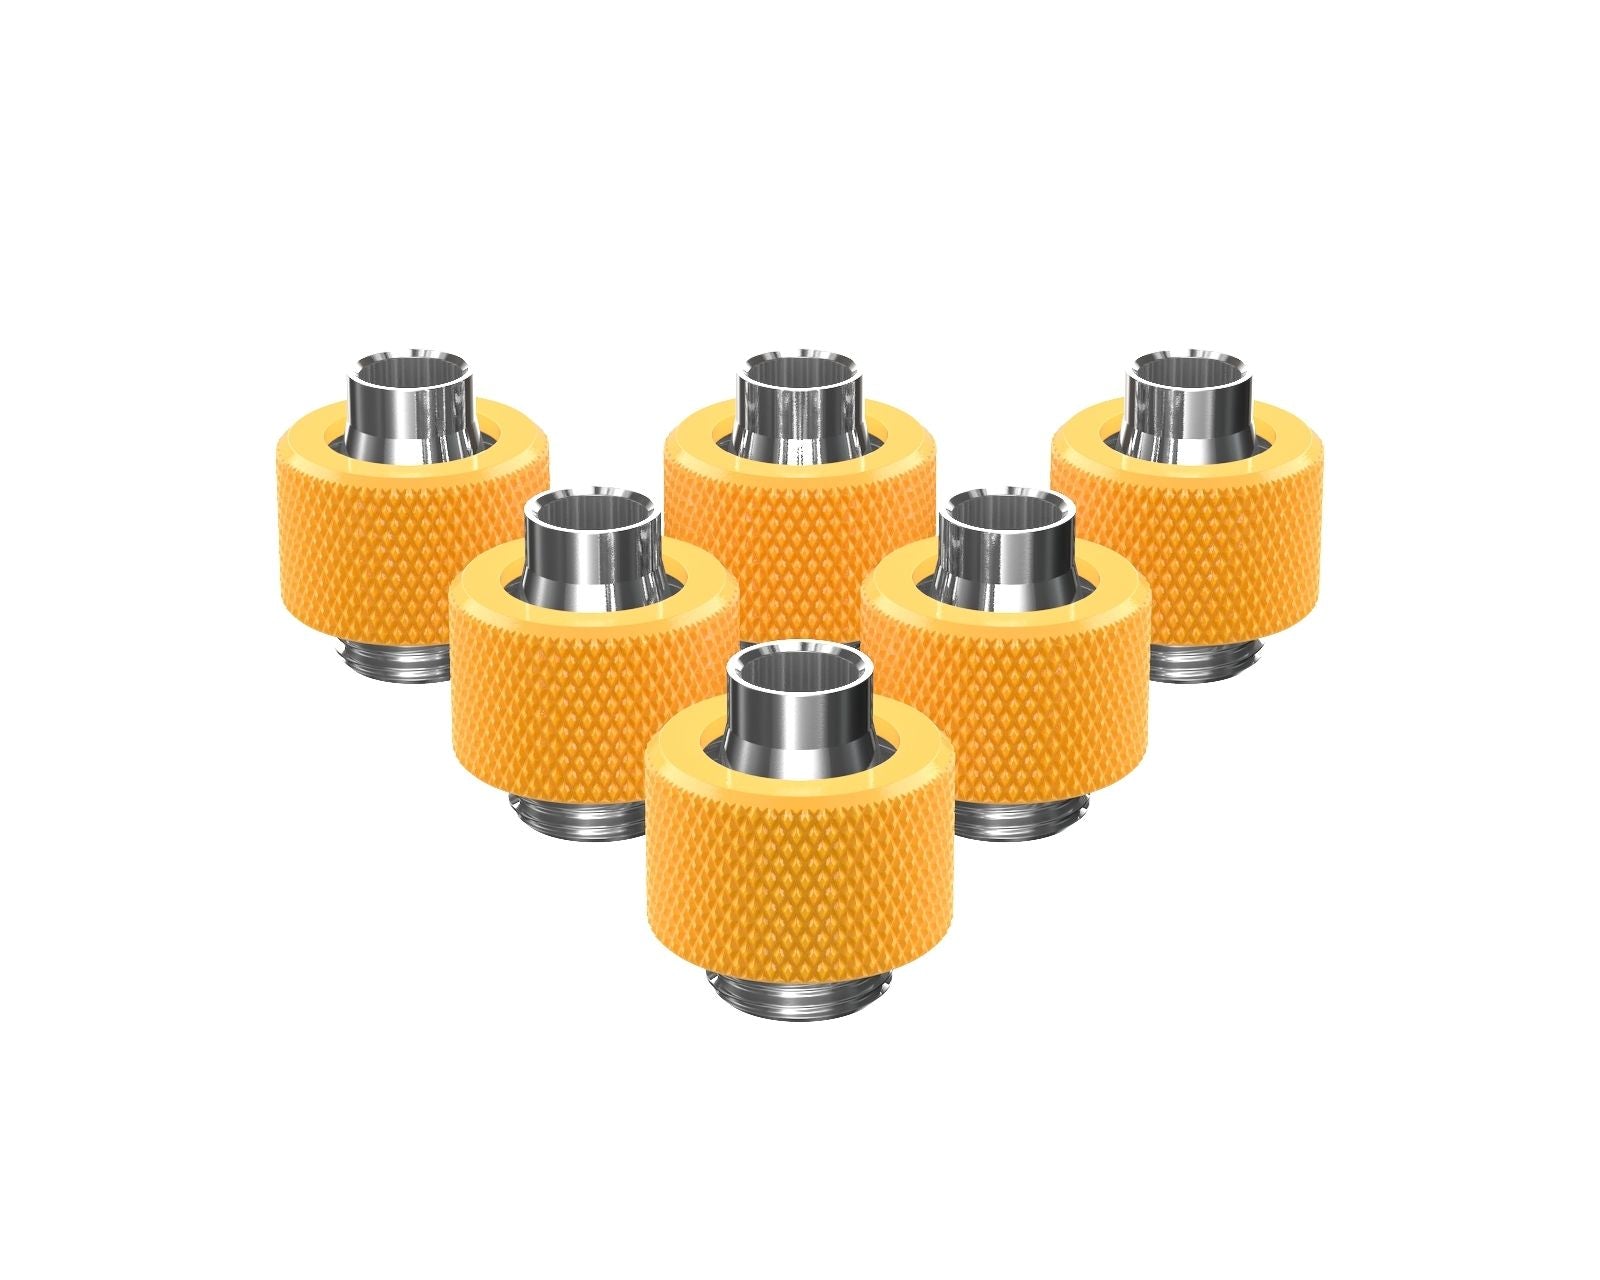 PrimoChill SecureFit SX - Premium Compression Fitting For 3/8in ID x 1/2in OD Flexible Tubing 6 Pack (F-SFSX12-6) - Available in 20+ Colors, Custom Watercooling Loop Ready - Yellow